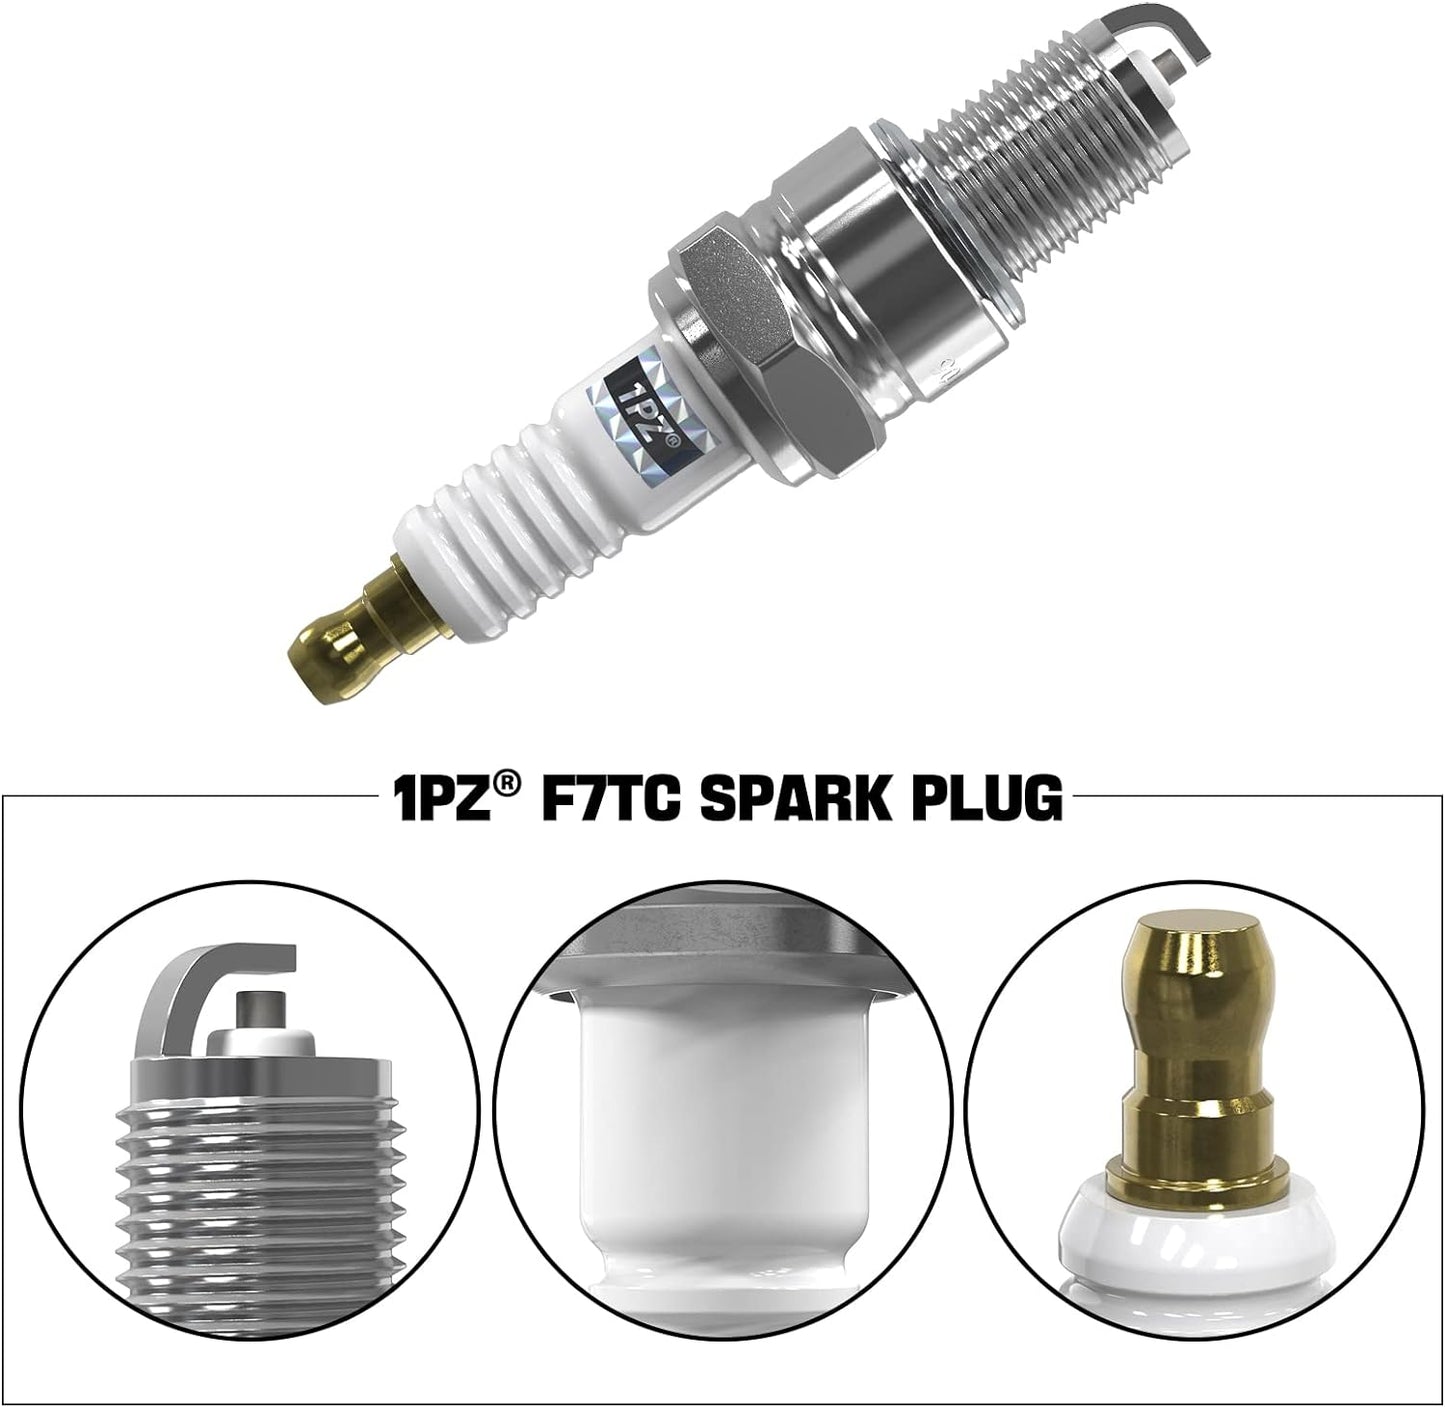 1PZ CBS-4NS Torch F6RTC Spark Plug Compatible with BPR6ES, Bosch WR6DC WR7DC, Champion RN9YC RN10YC, OCC-751-10292, MTD 751-10292, 951-10292, Replace for Mowers Snow Blowers Splitters Tillers(5 Pack)